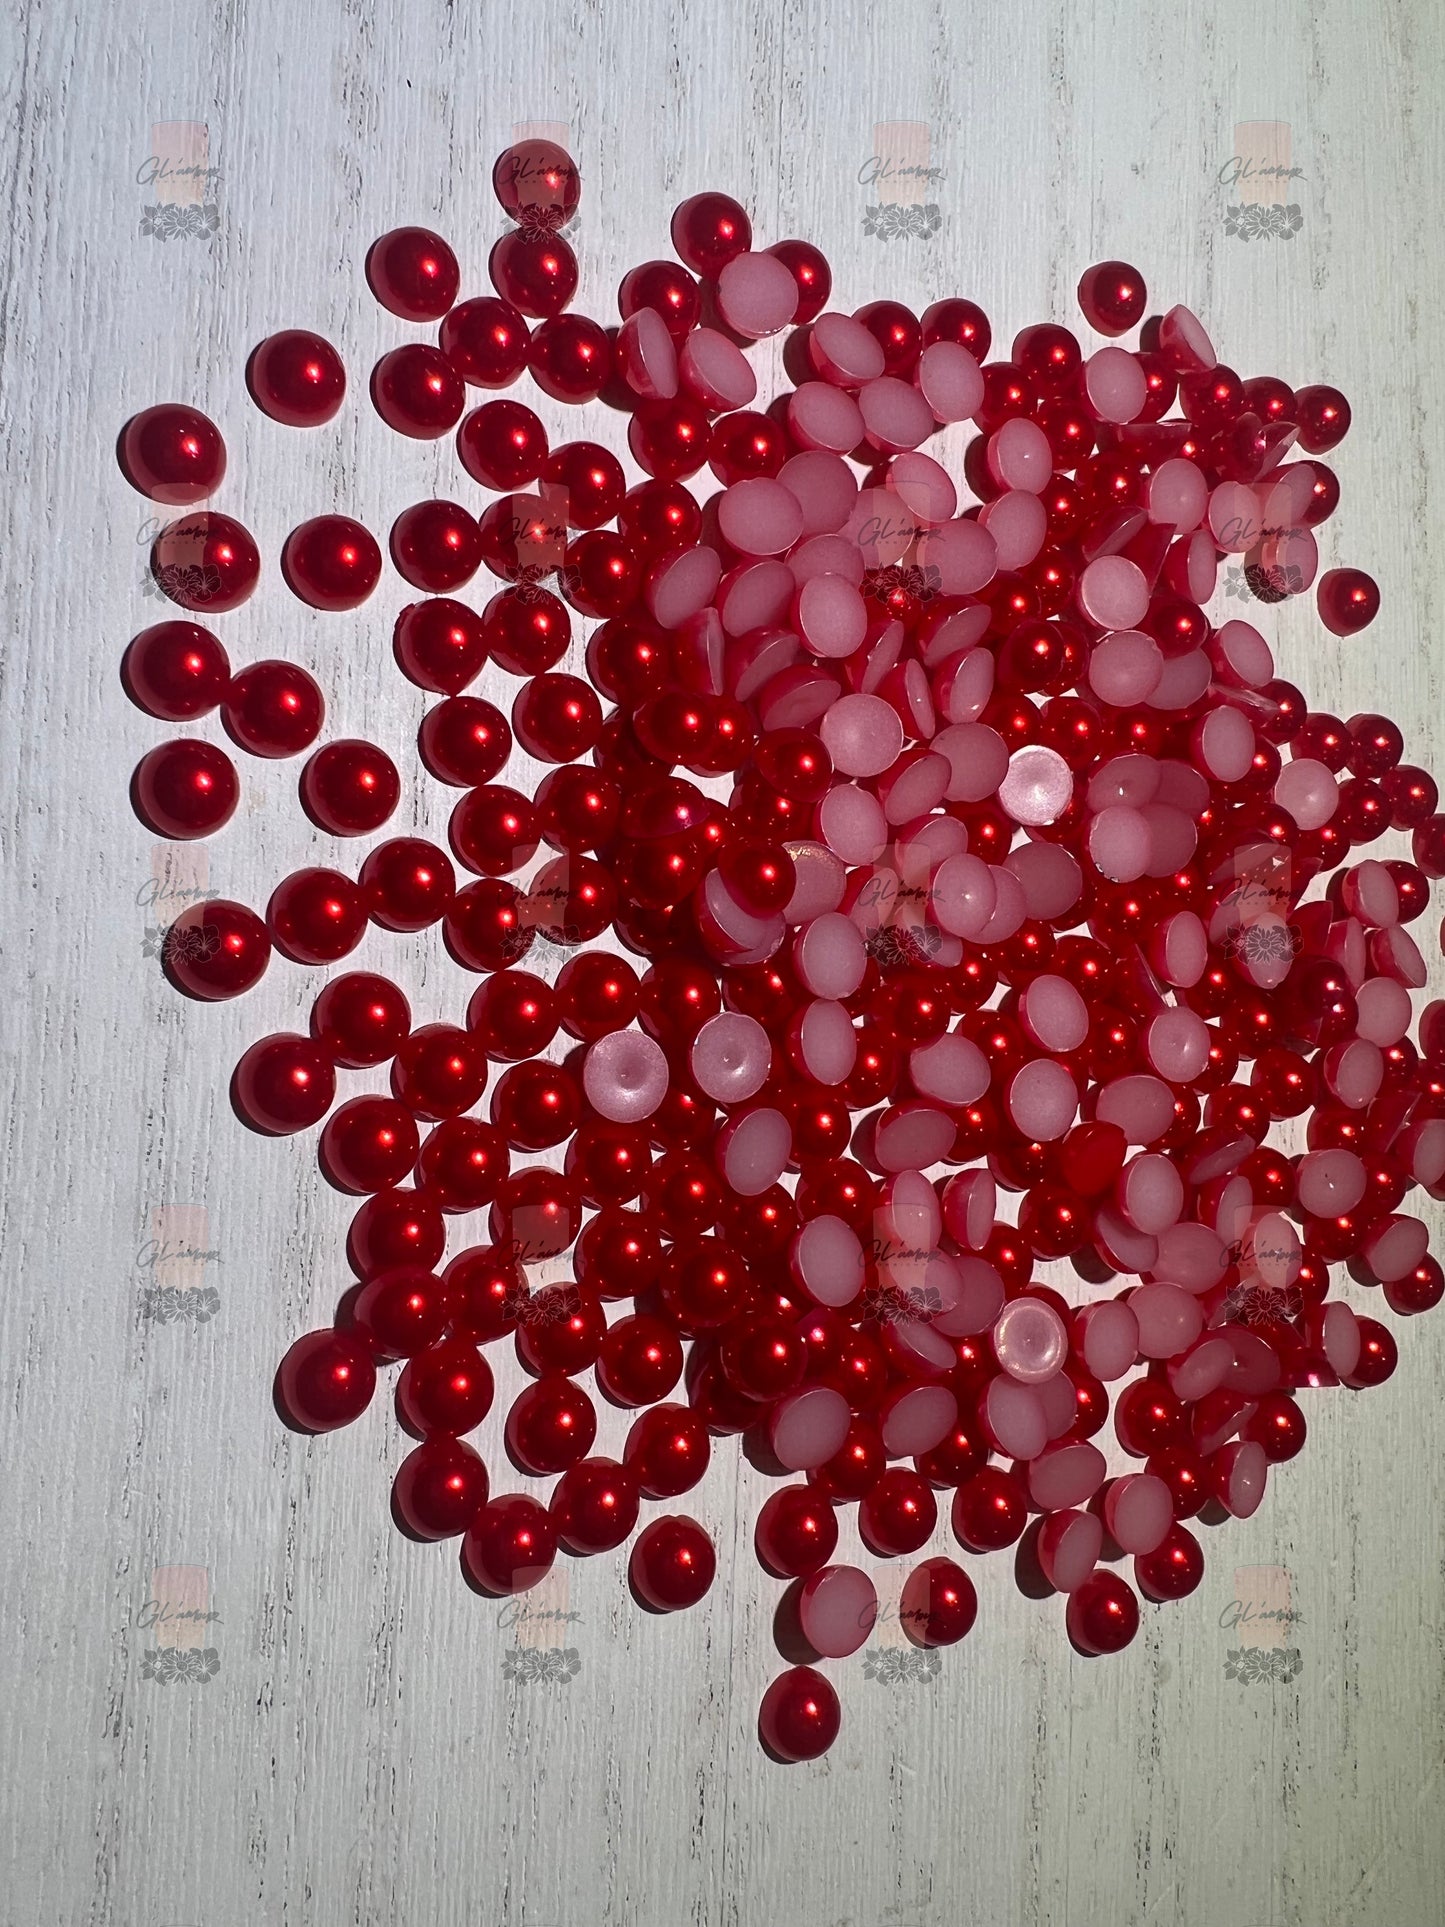 Red Half Flat Back Pearls sizes 3mm-8mm